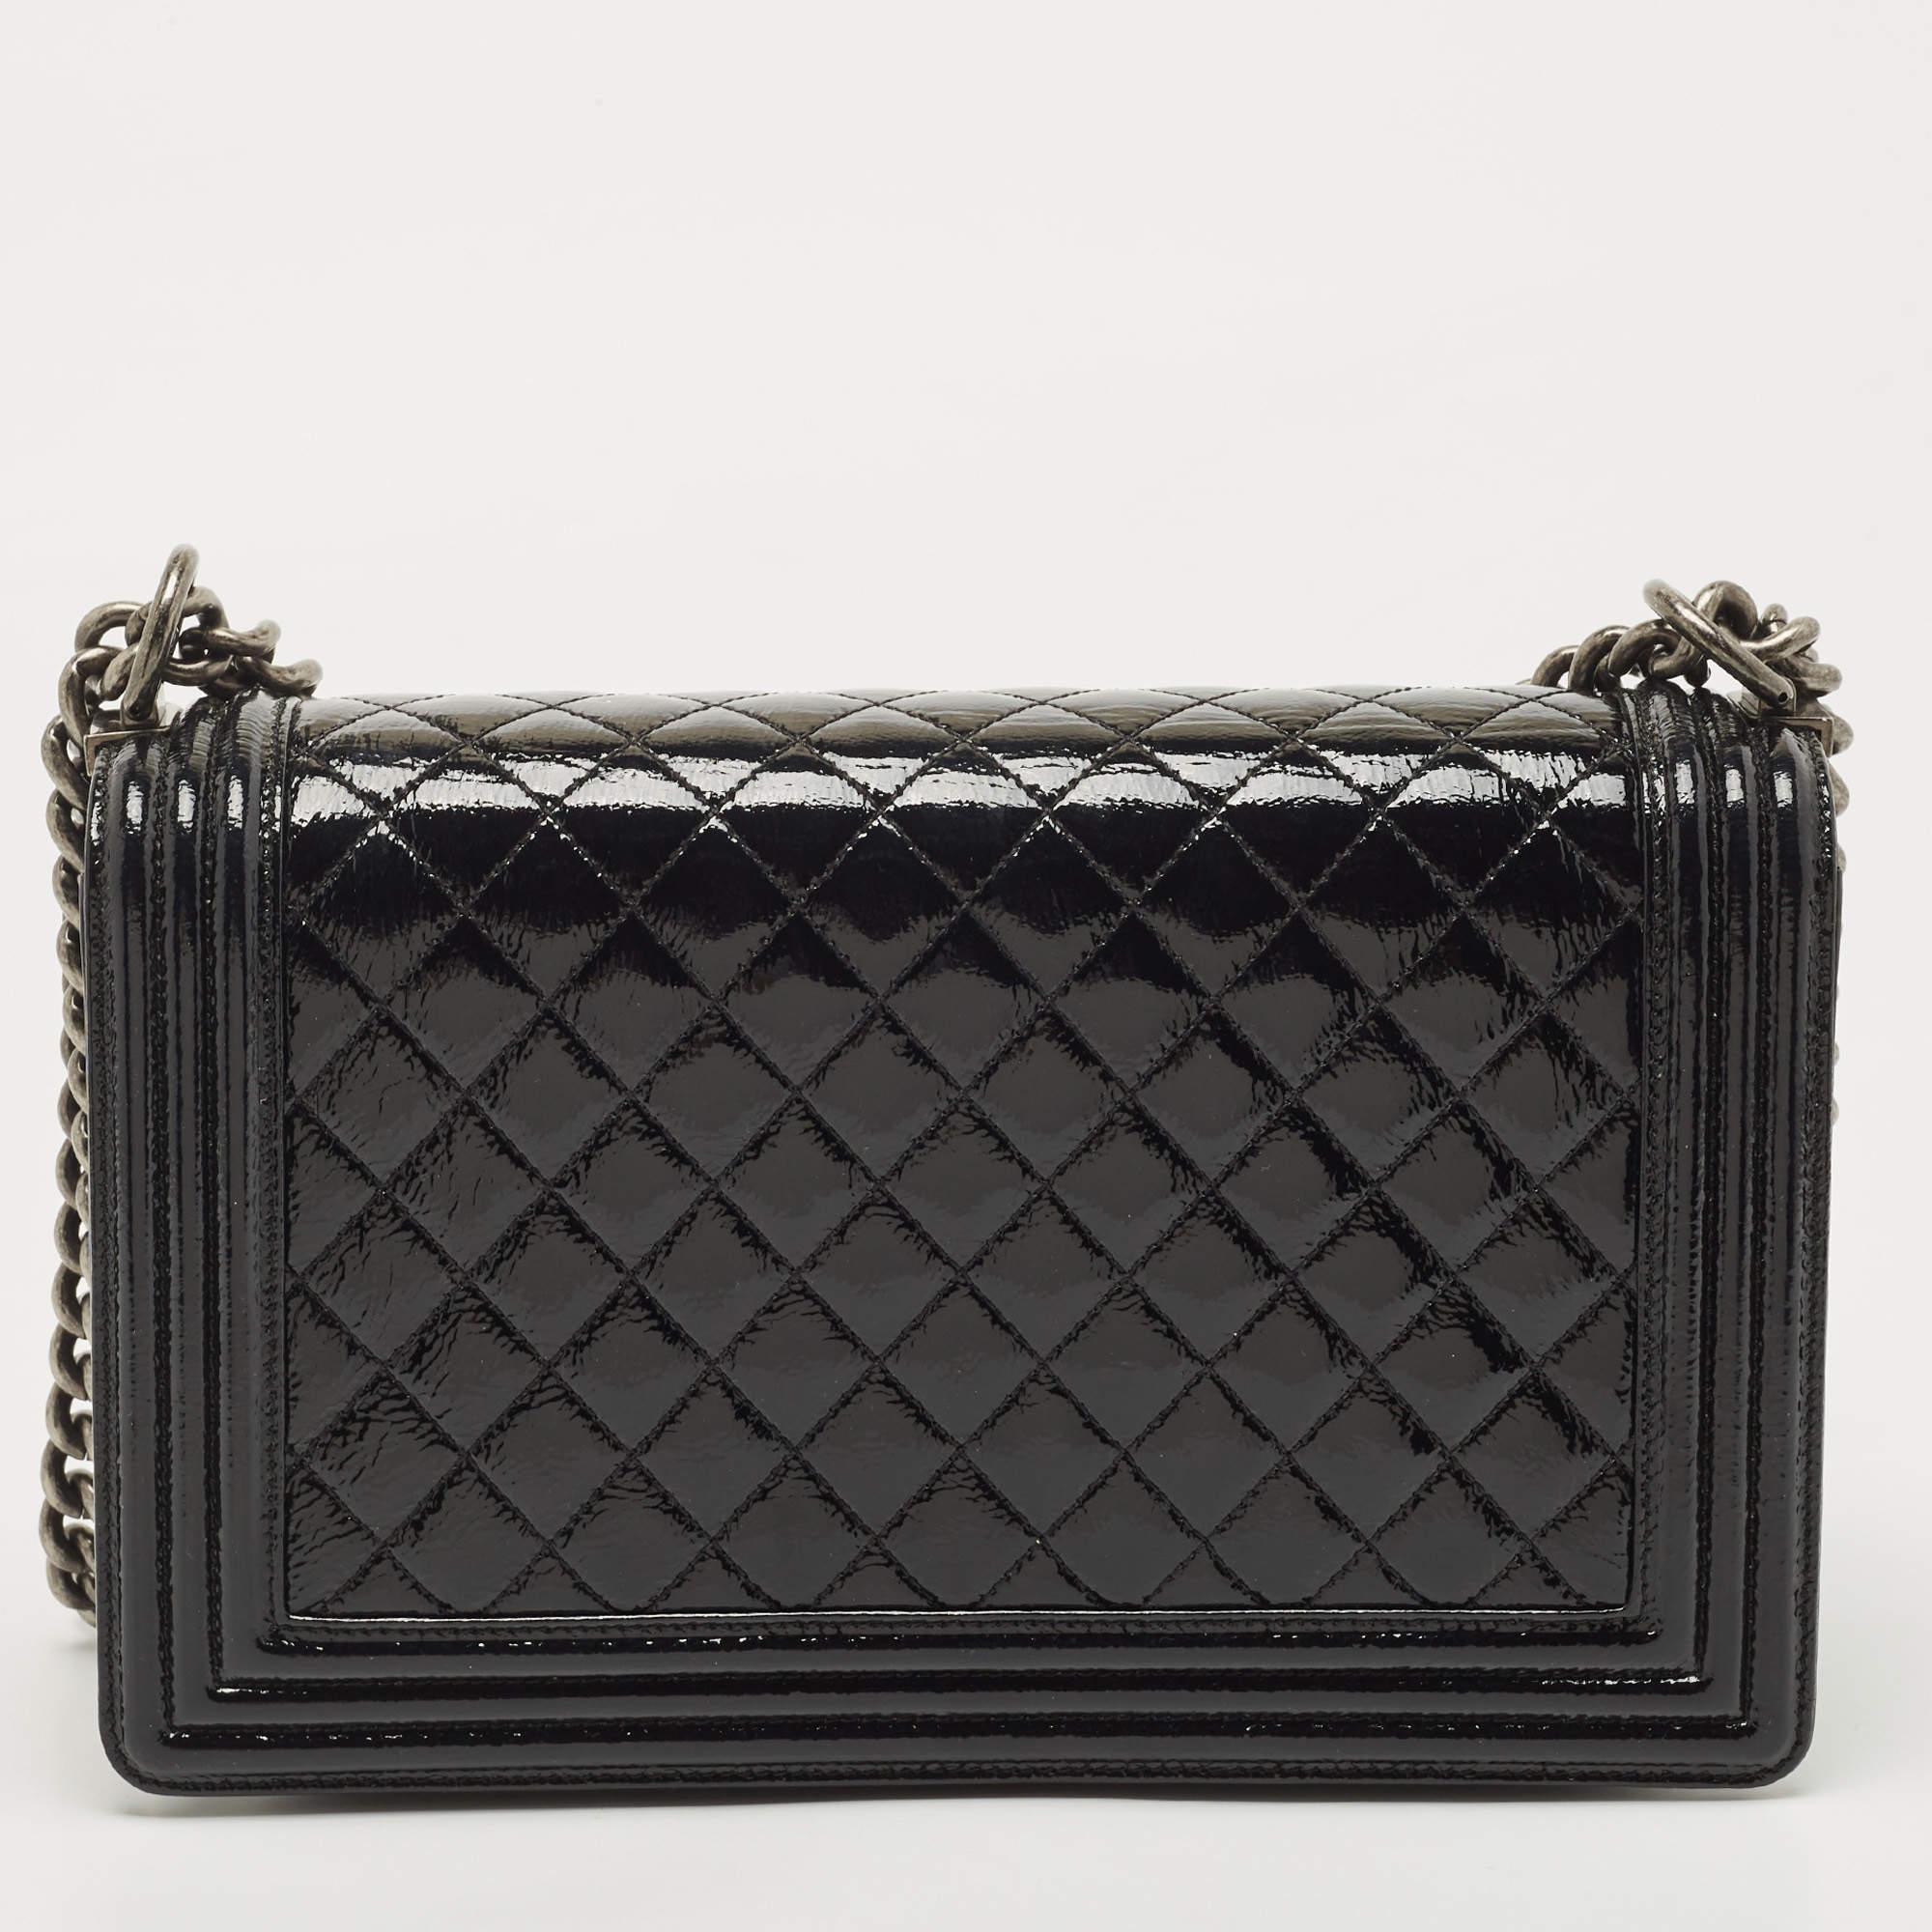 Chanel Black Quilted Patent Leather New Medium Boy Flap Bag 5